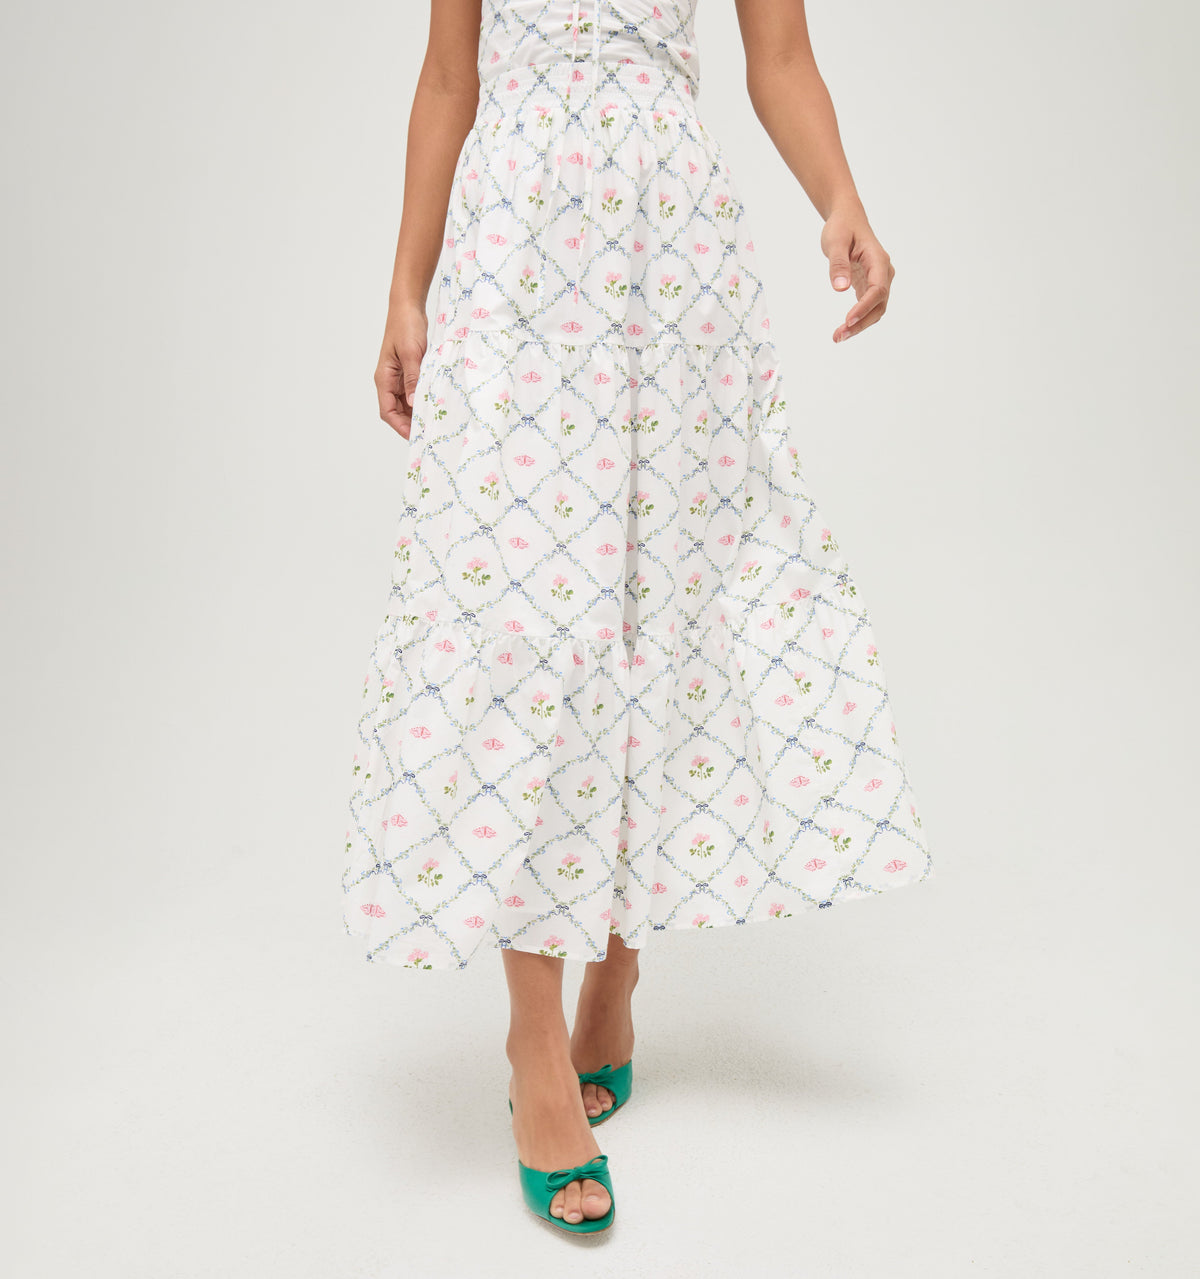 The Florence Nap Skirt in Butterfly Trellis Cotton Poplin